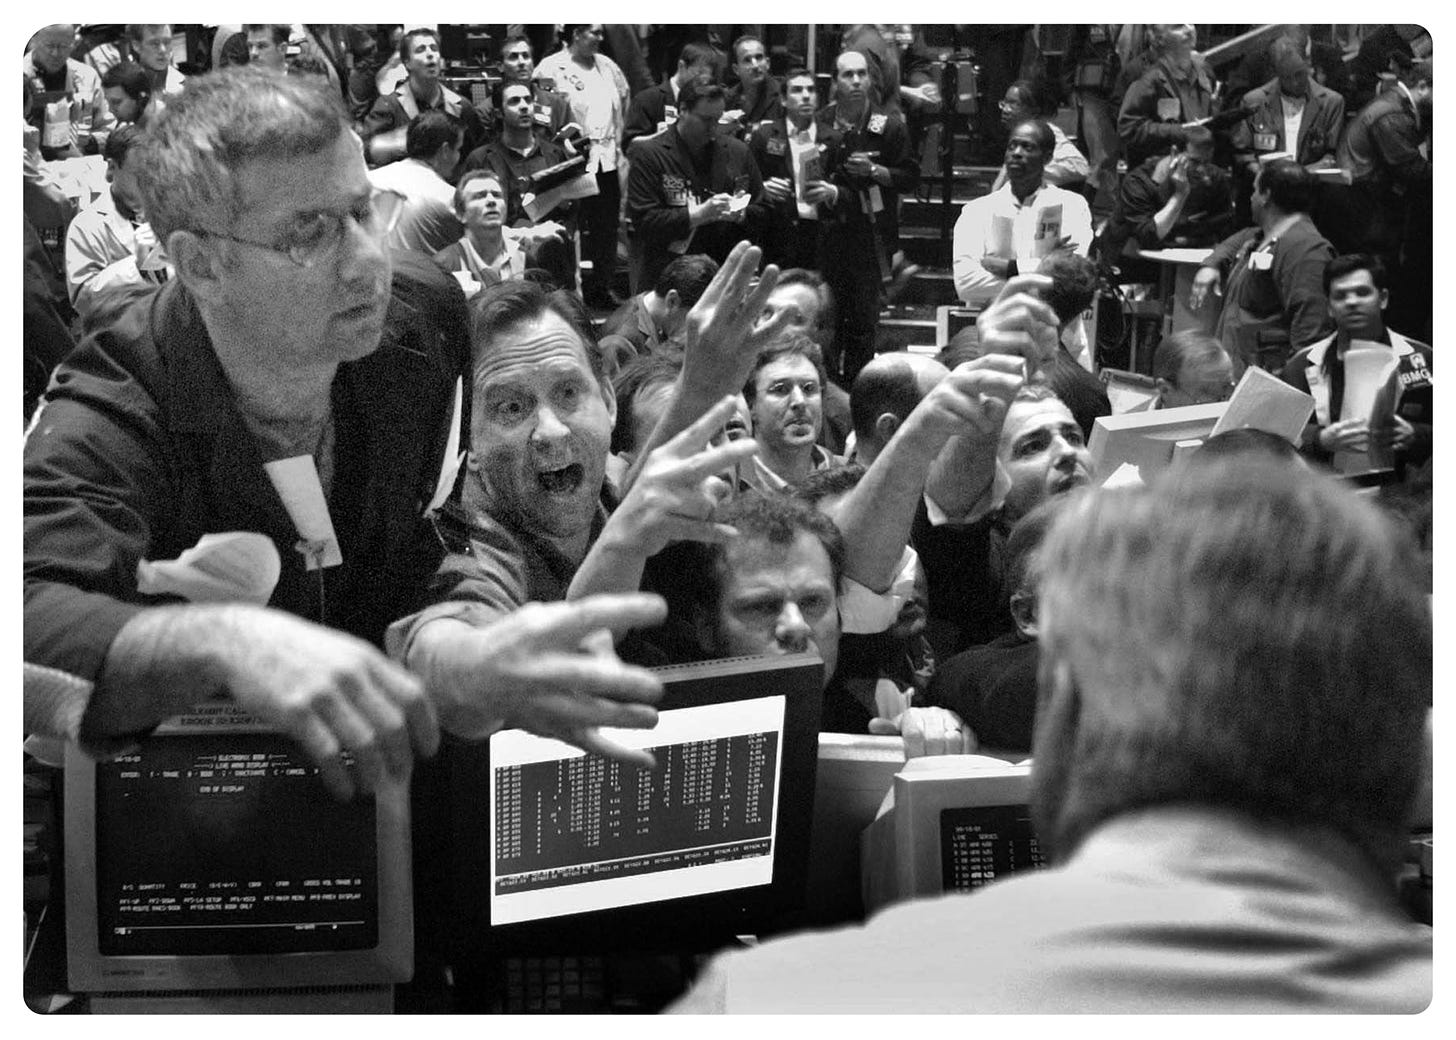 A black & white photo from the 1980's, found under google image search results 'Wall Street Bull Market'. Depicts many people on a chicago trading room floor, in the midst of trading. Gives a sense of frenzy